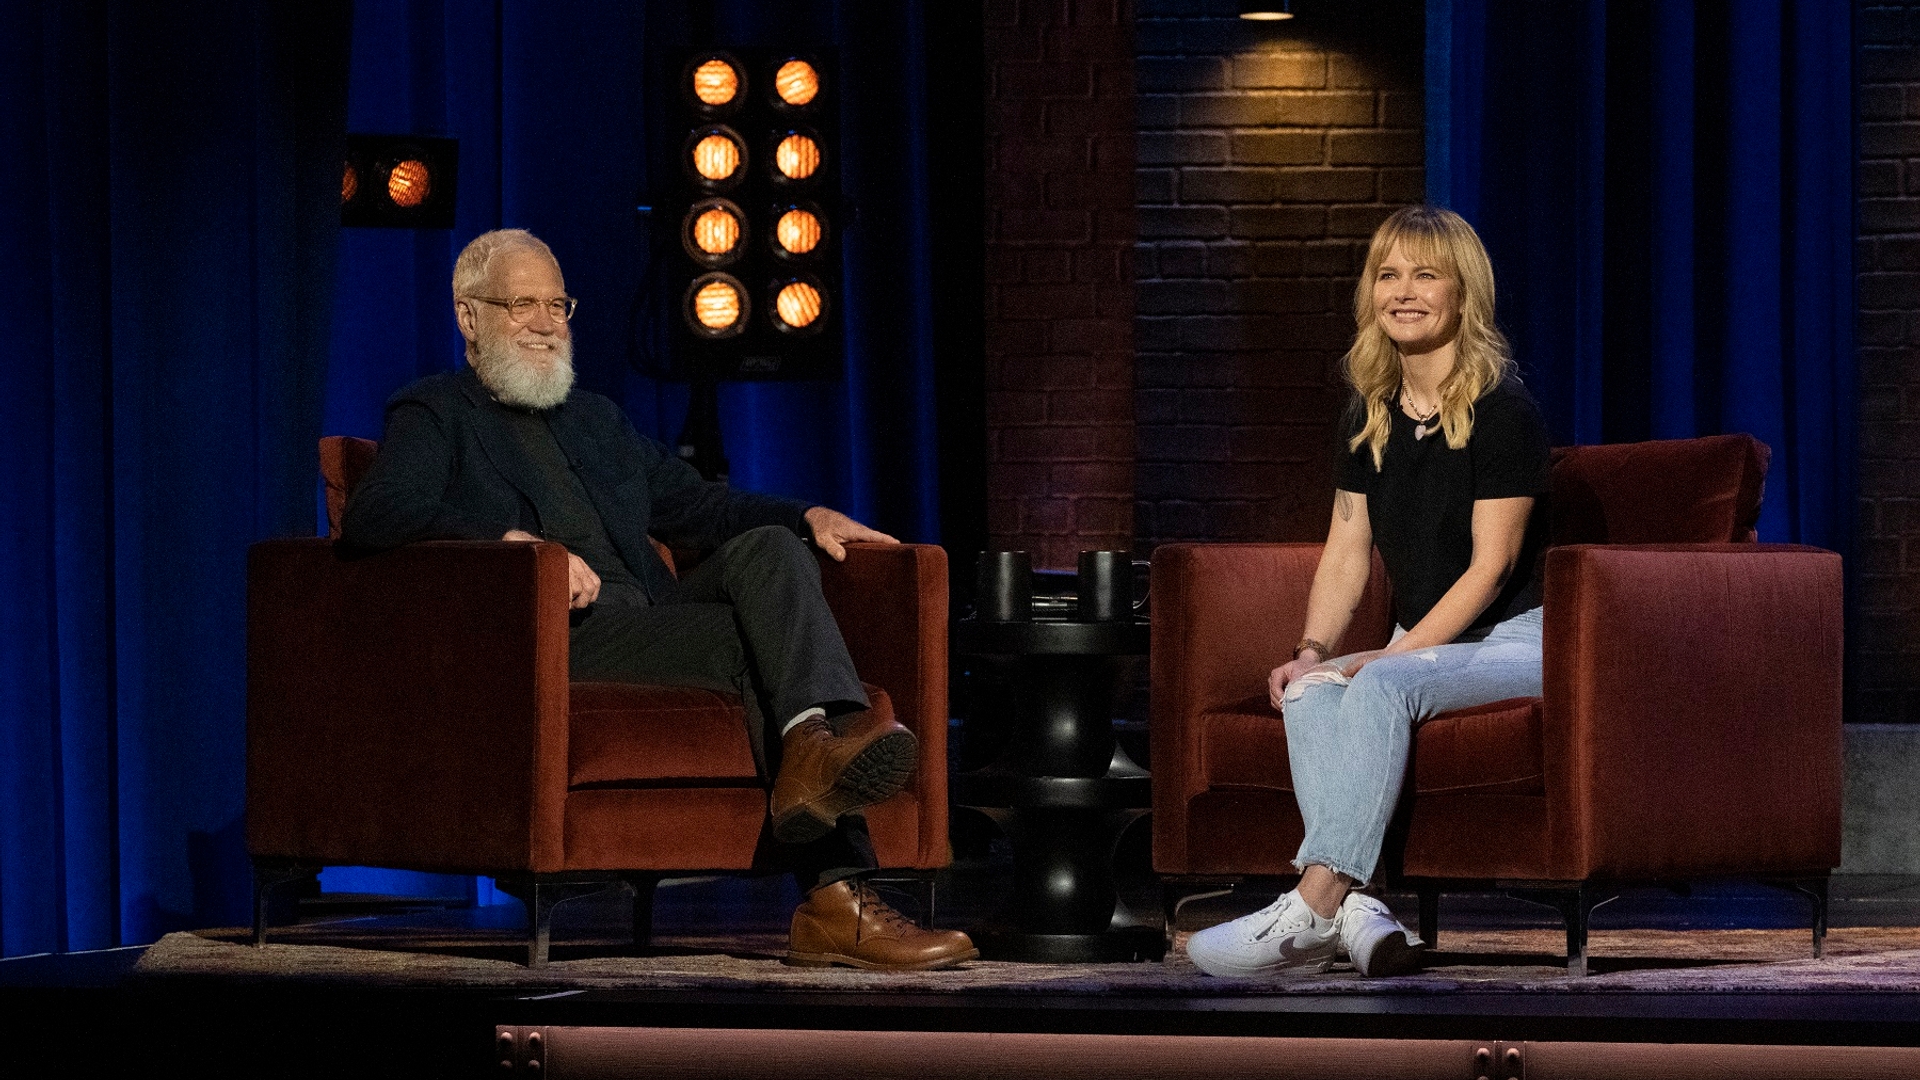 That's My Time with David Letterman